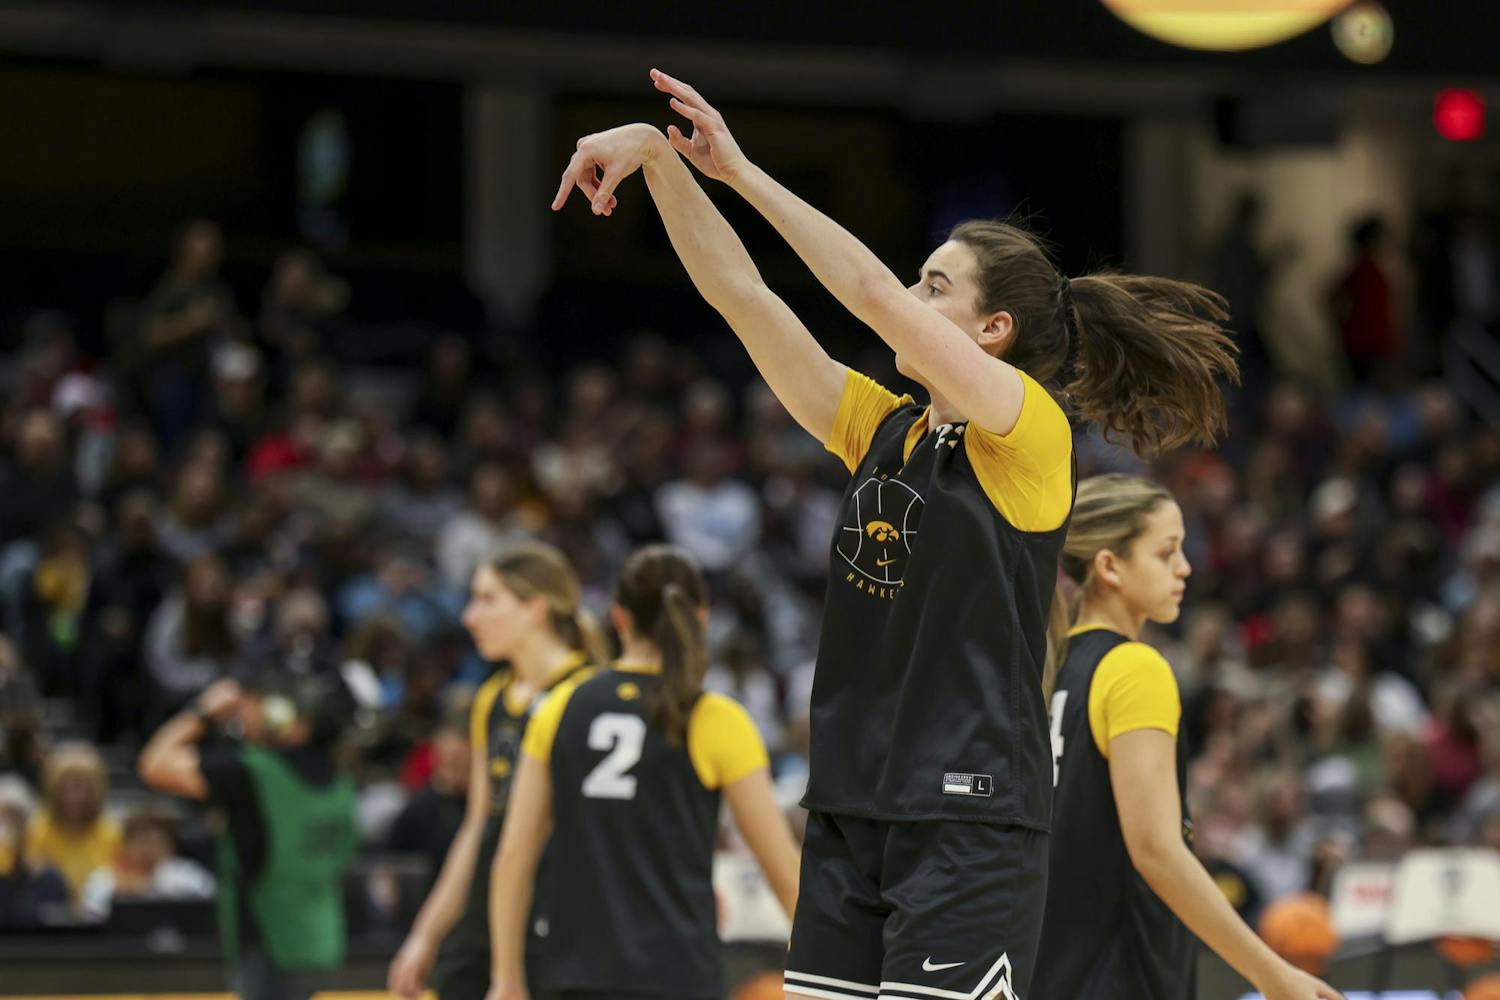 Hawkeye senior guard Caitlin Clark attempts a 3-point shot during Super Saturday open practice in Cleveland, Ohio. Clark scored 21 points for the Hawkeyes during their semifinal match-up against the University of Connecticut Huskies on April 5, 2024. The semifinal game marked the second time this 鶹С򽴫ý that Clark did not lead the Hawkeyes in scoring.